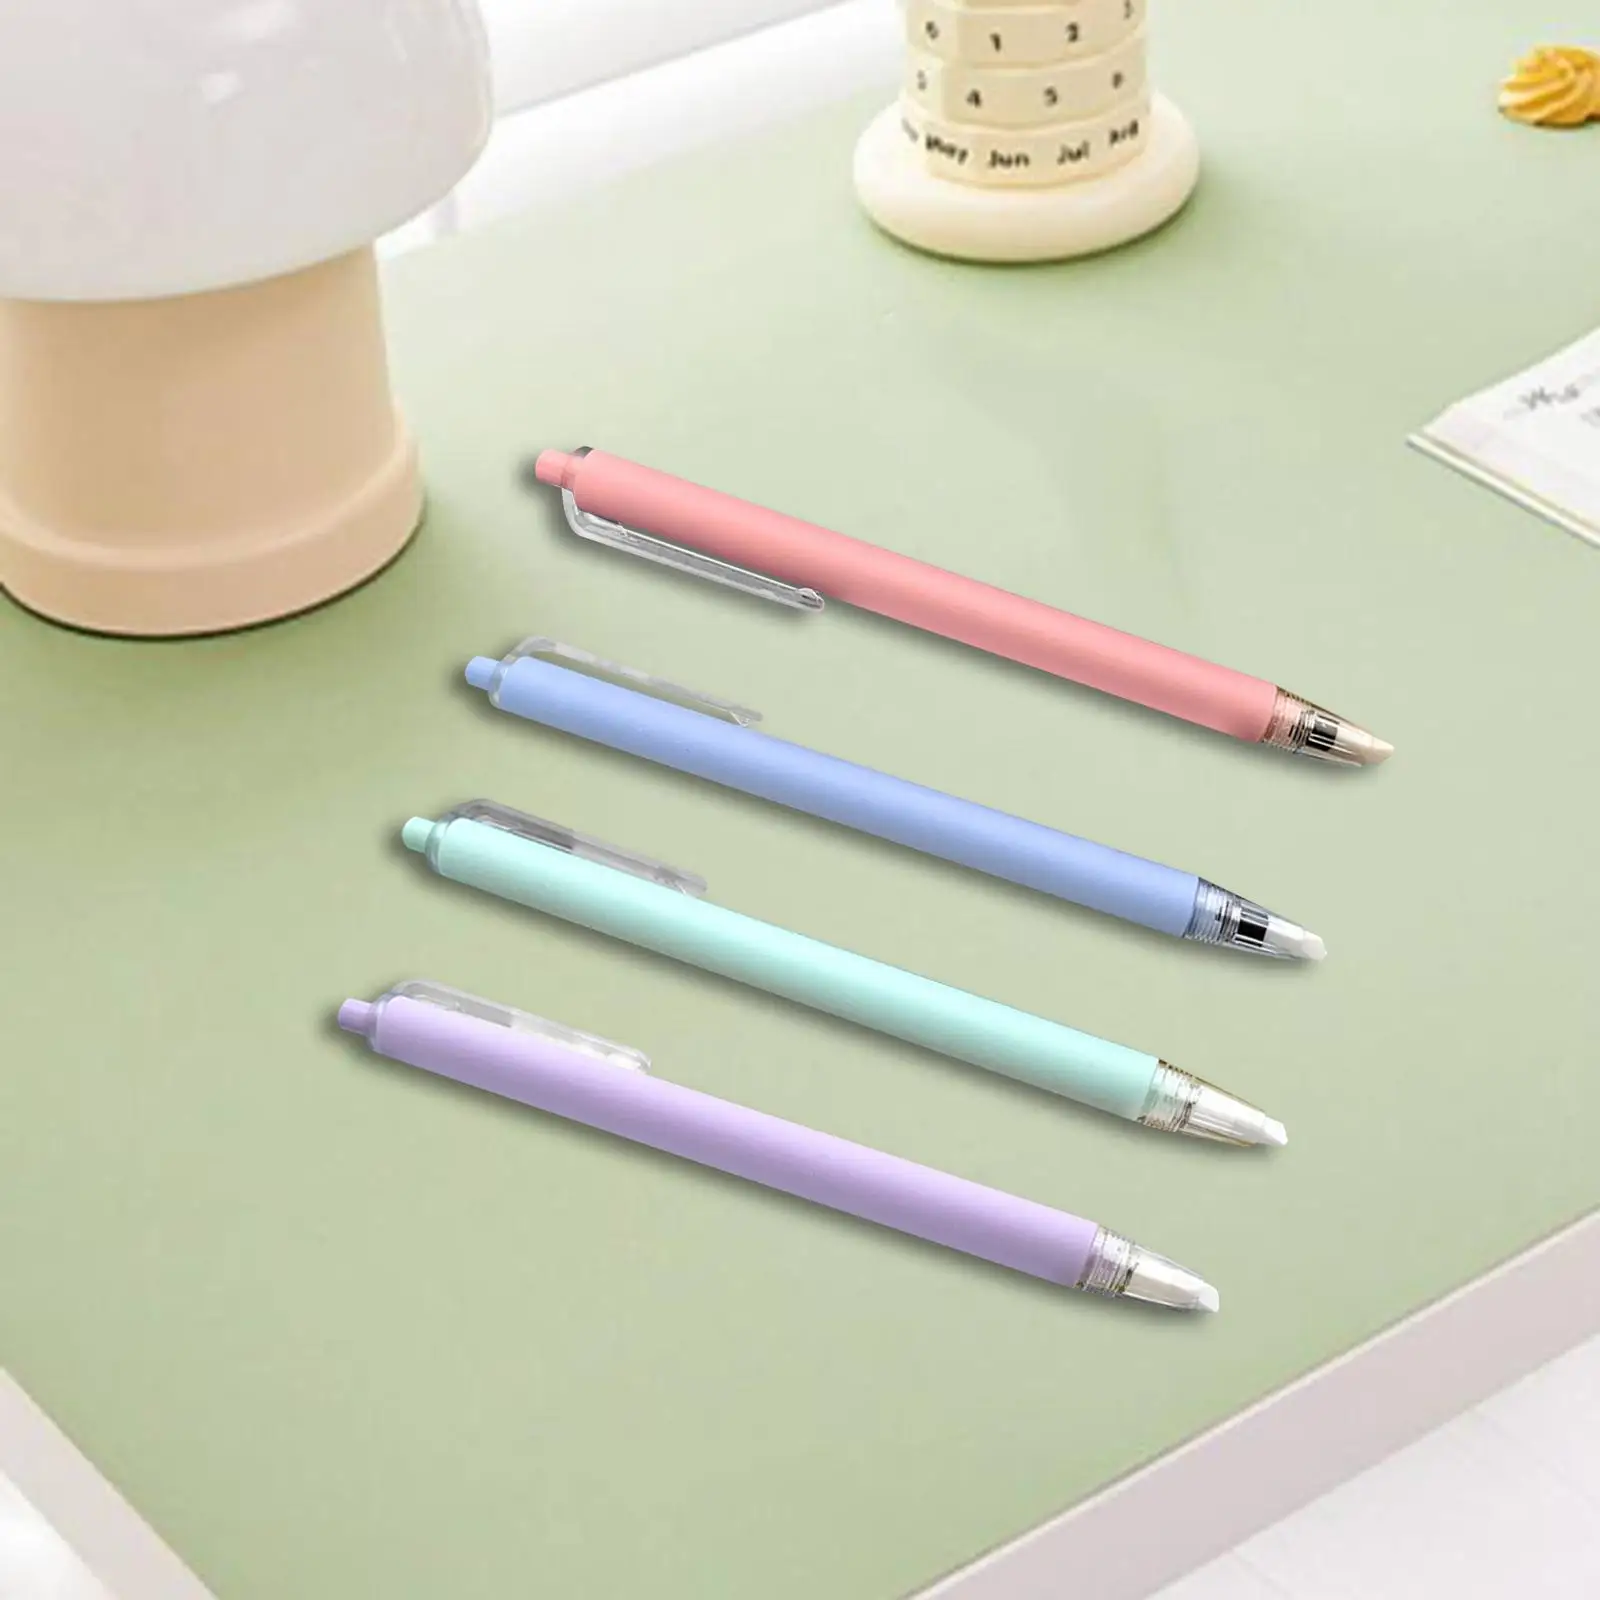 4 Pieces Paper Cutting Tool Portable Scrapbooking Cutting Tool Paper Cutter Pen for Card Artist Art Paper Drawing Stencil Making